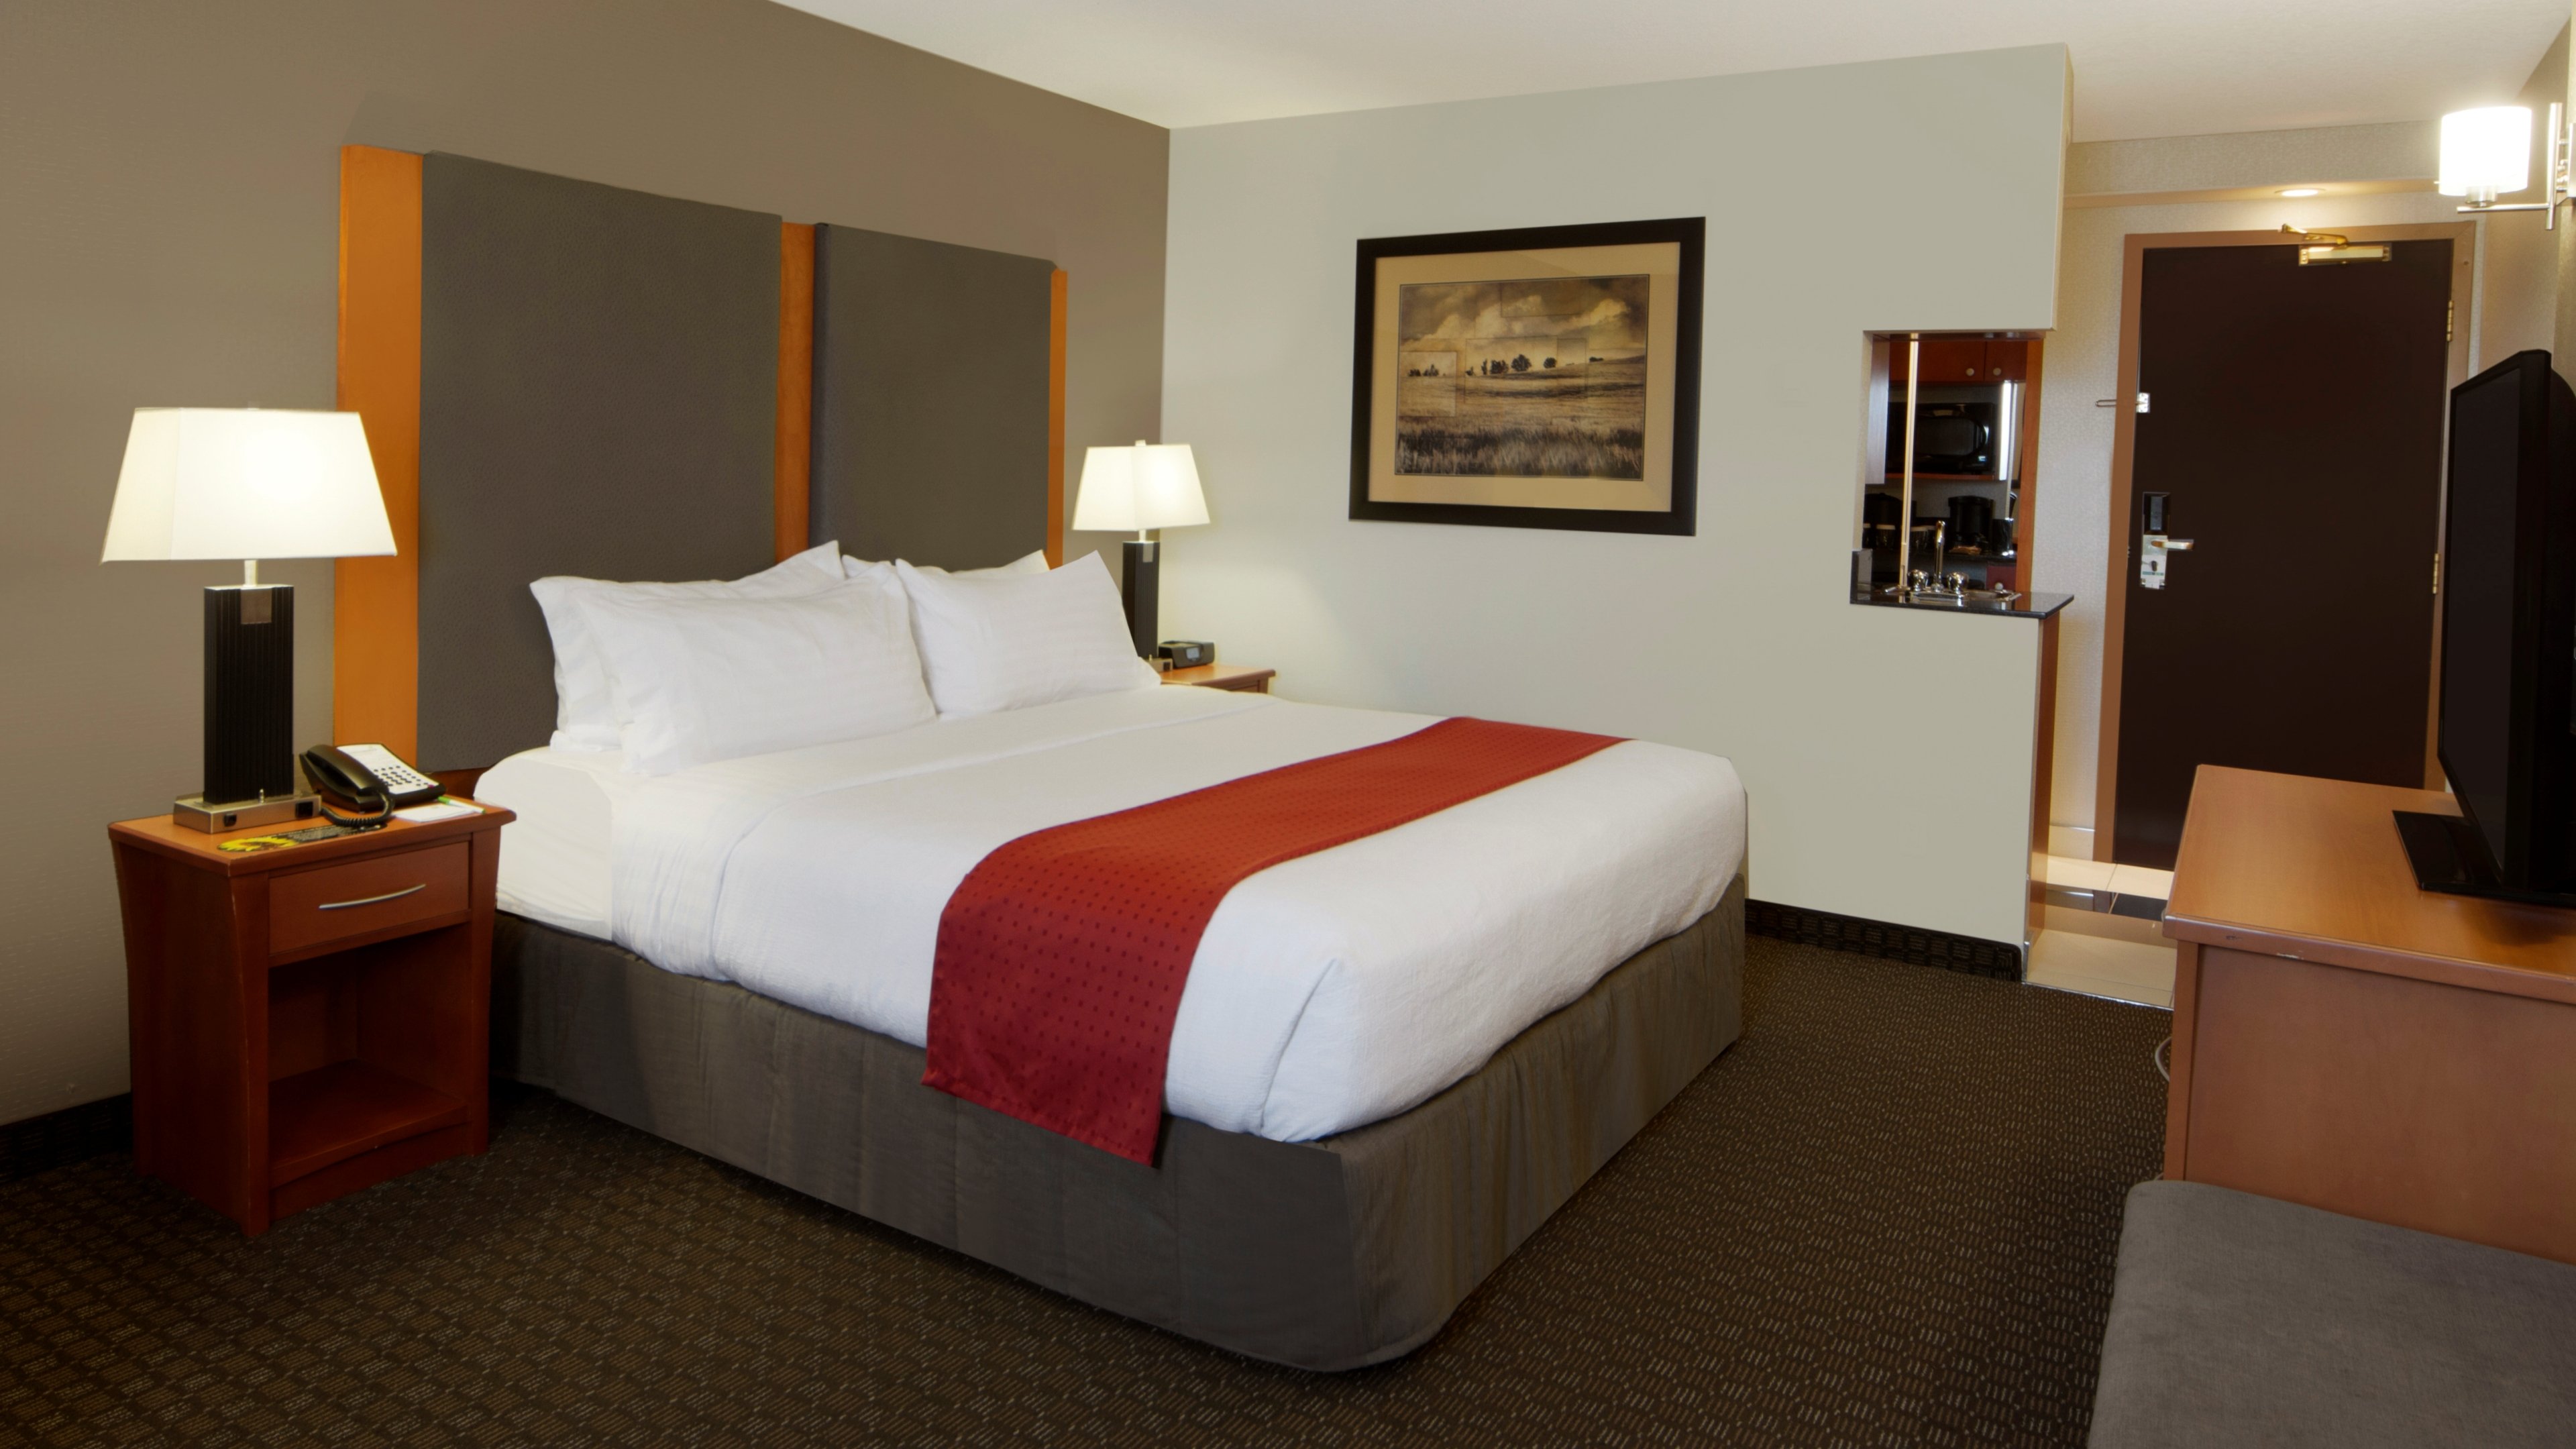 Enjoy a Relaxing Stay in our Newly Renovated King Executive Room